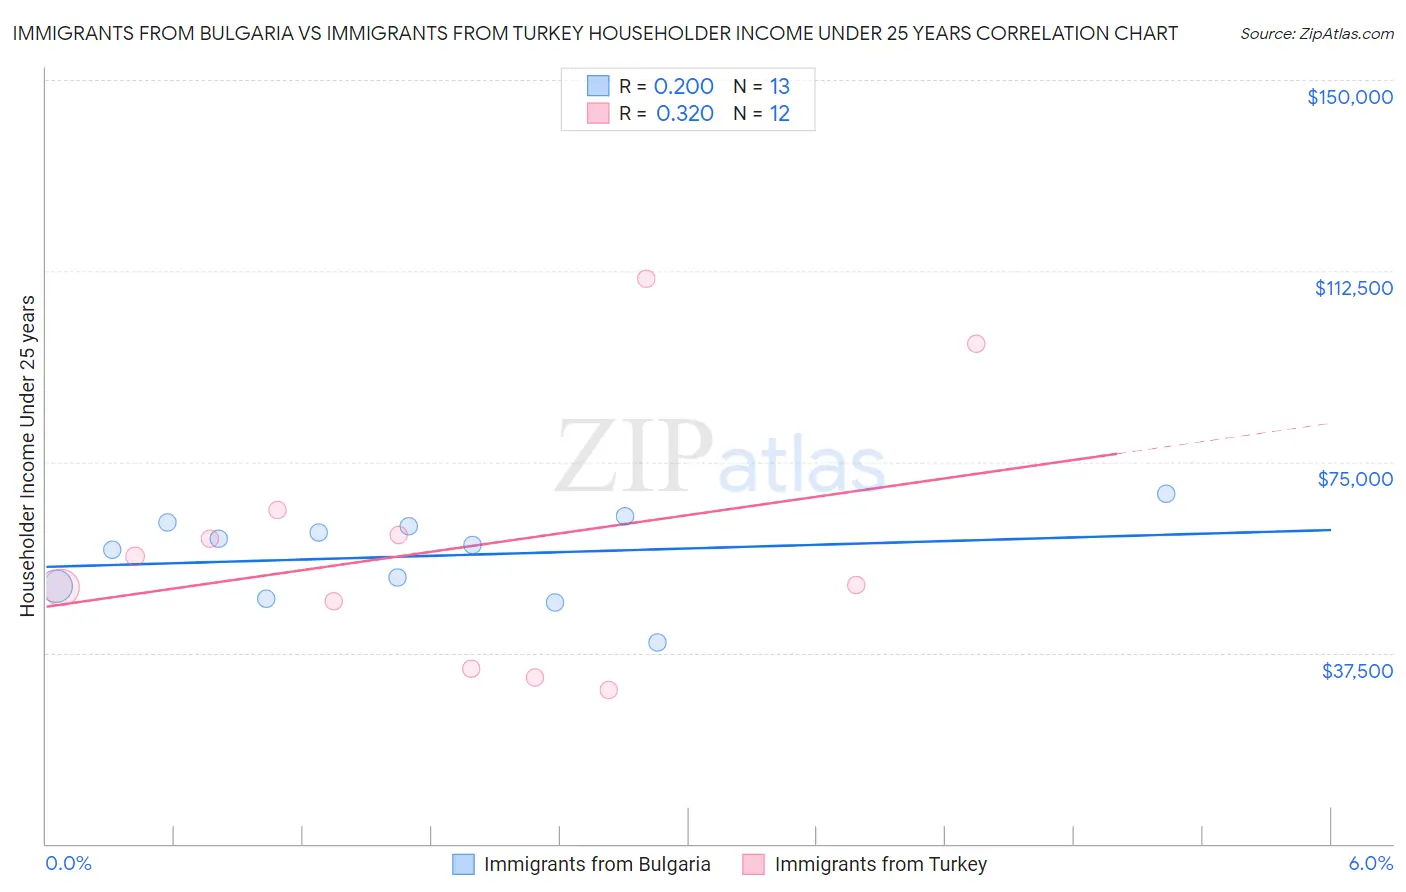 Immigrants from Bulgaria vs Immigrants from Turkey Householder Income Under 25 years